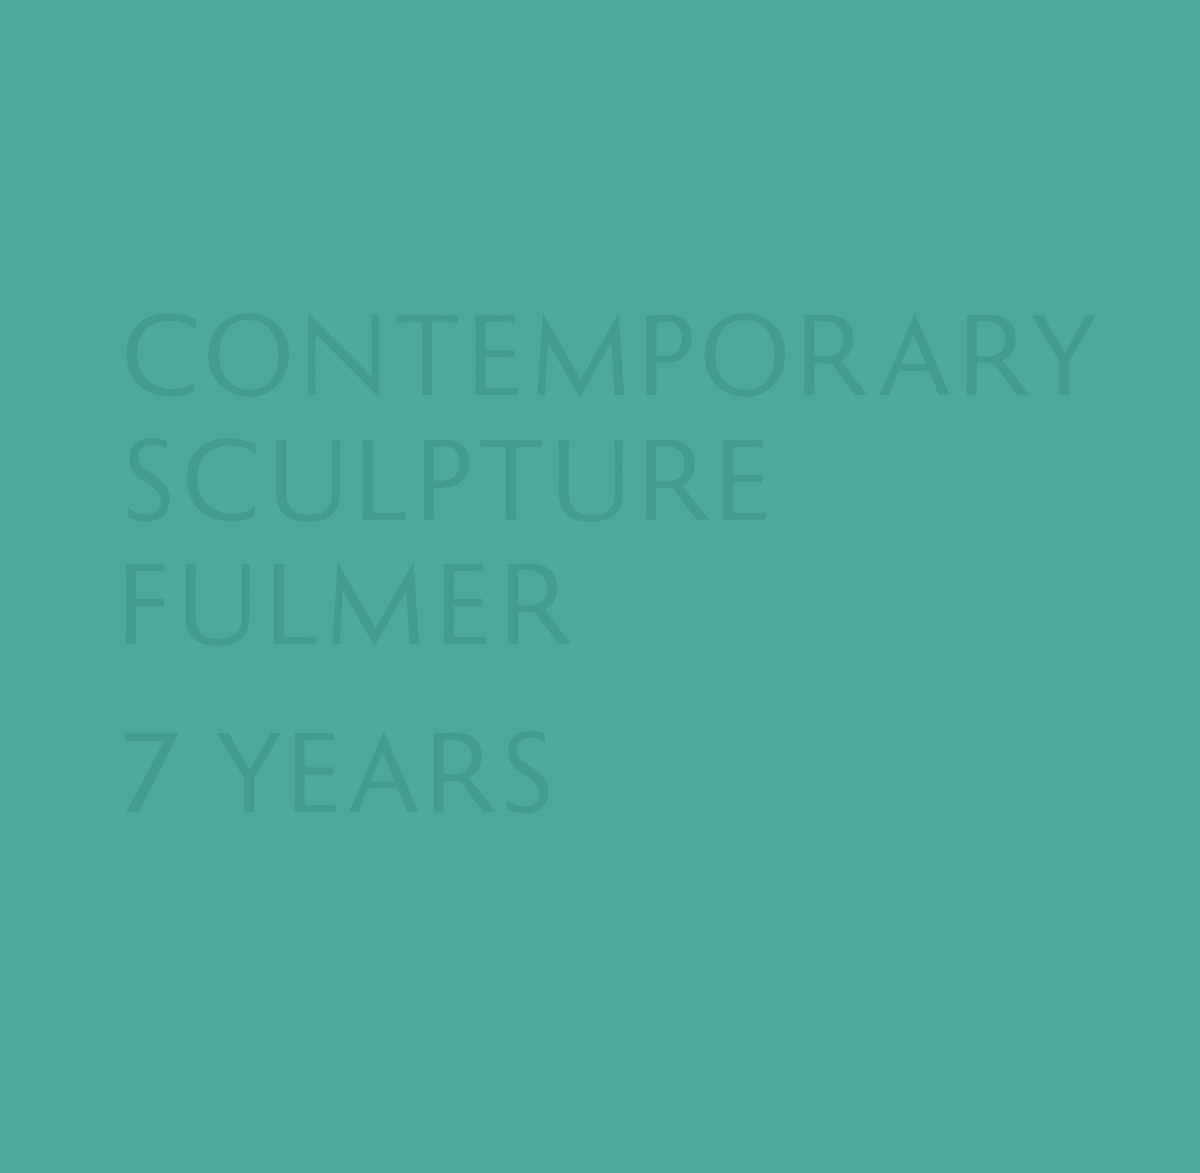 Contemporary Sculpture Fulmer: 7 Years